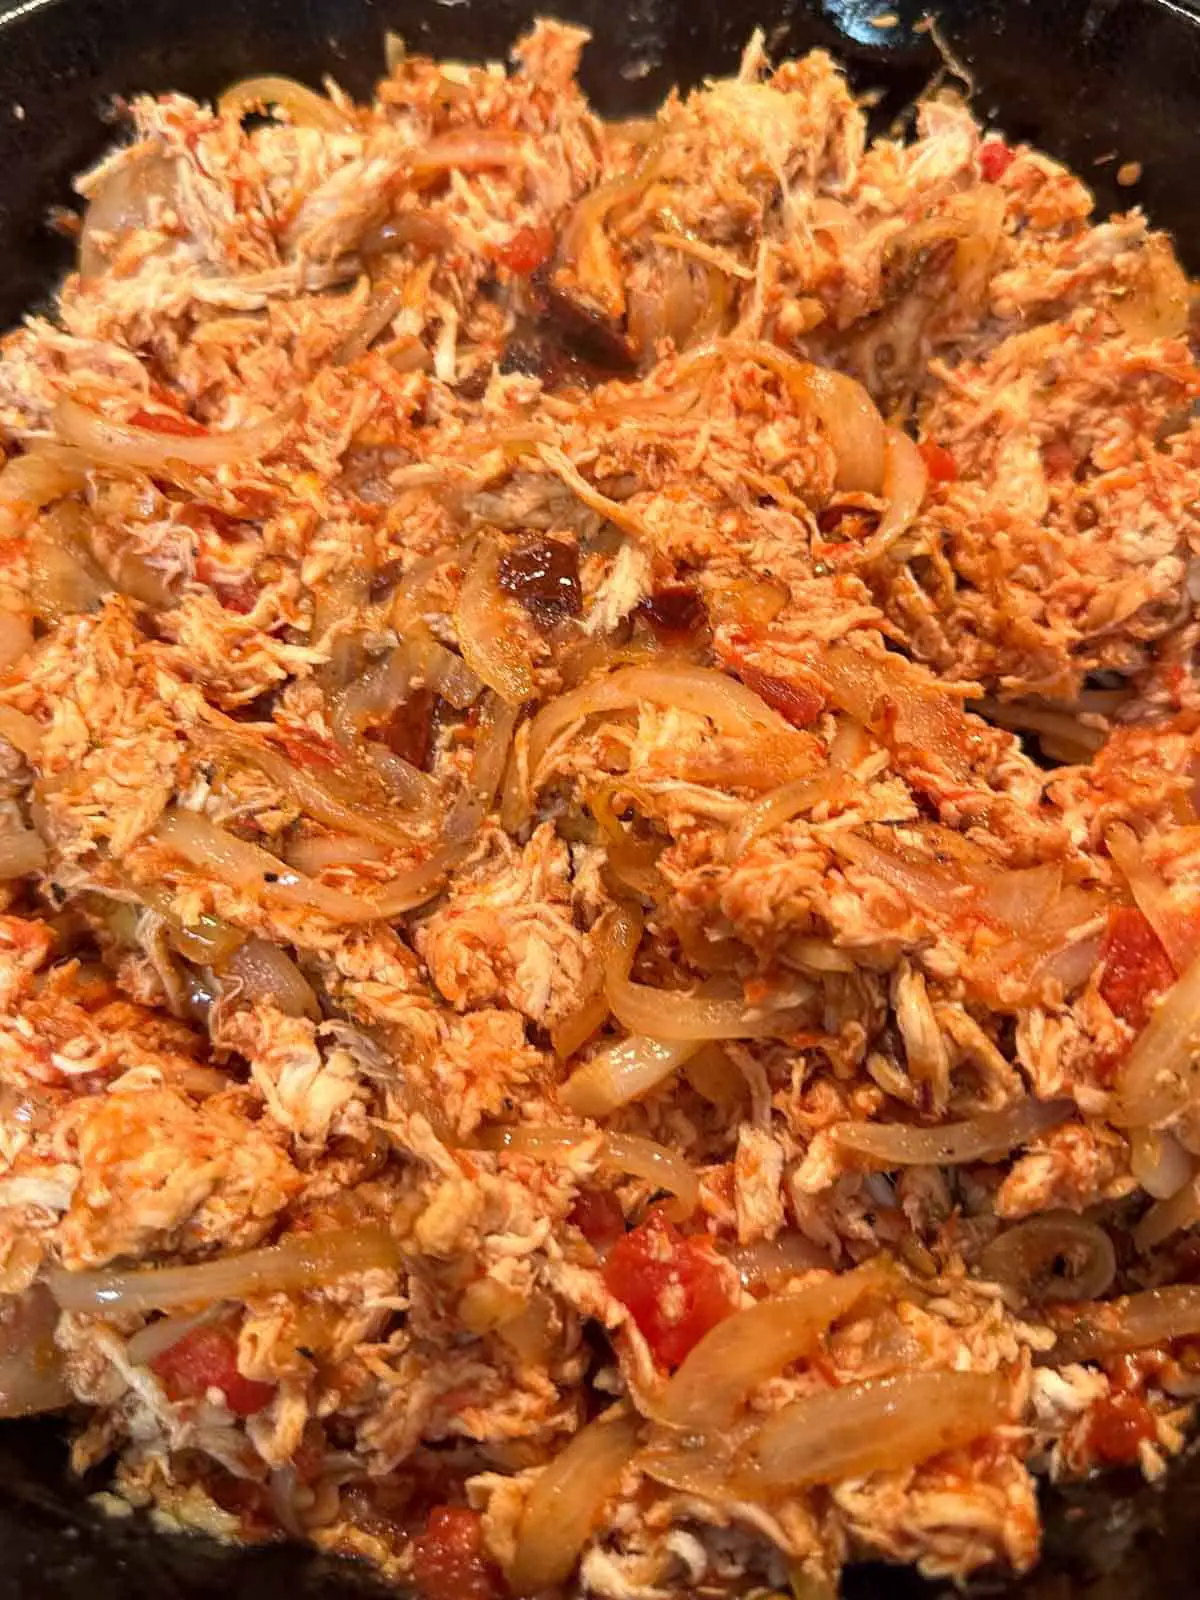 Shredded chicken cooked with tomatoes, onions, and chipotle peppers in an adobo sauce in a cast iron pan.